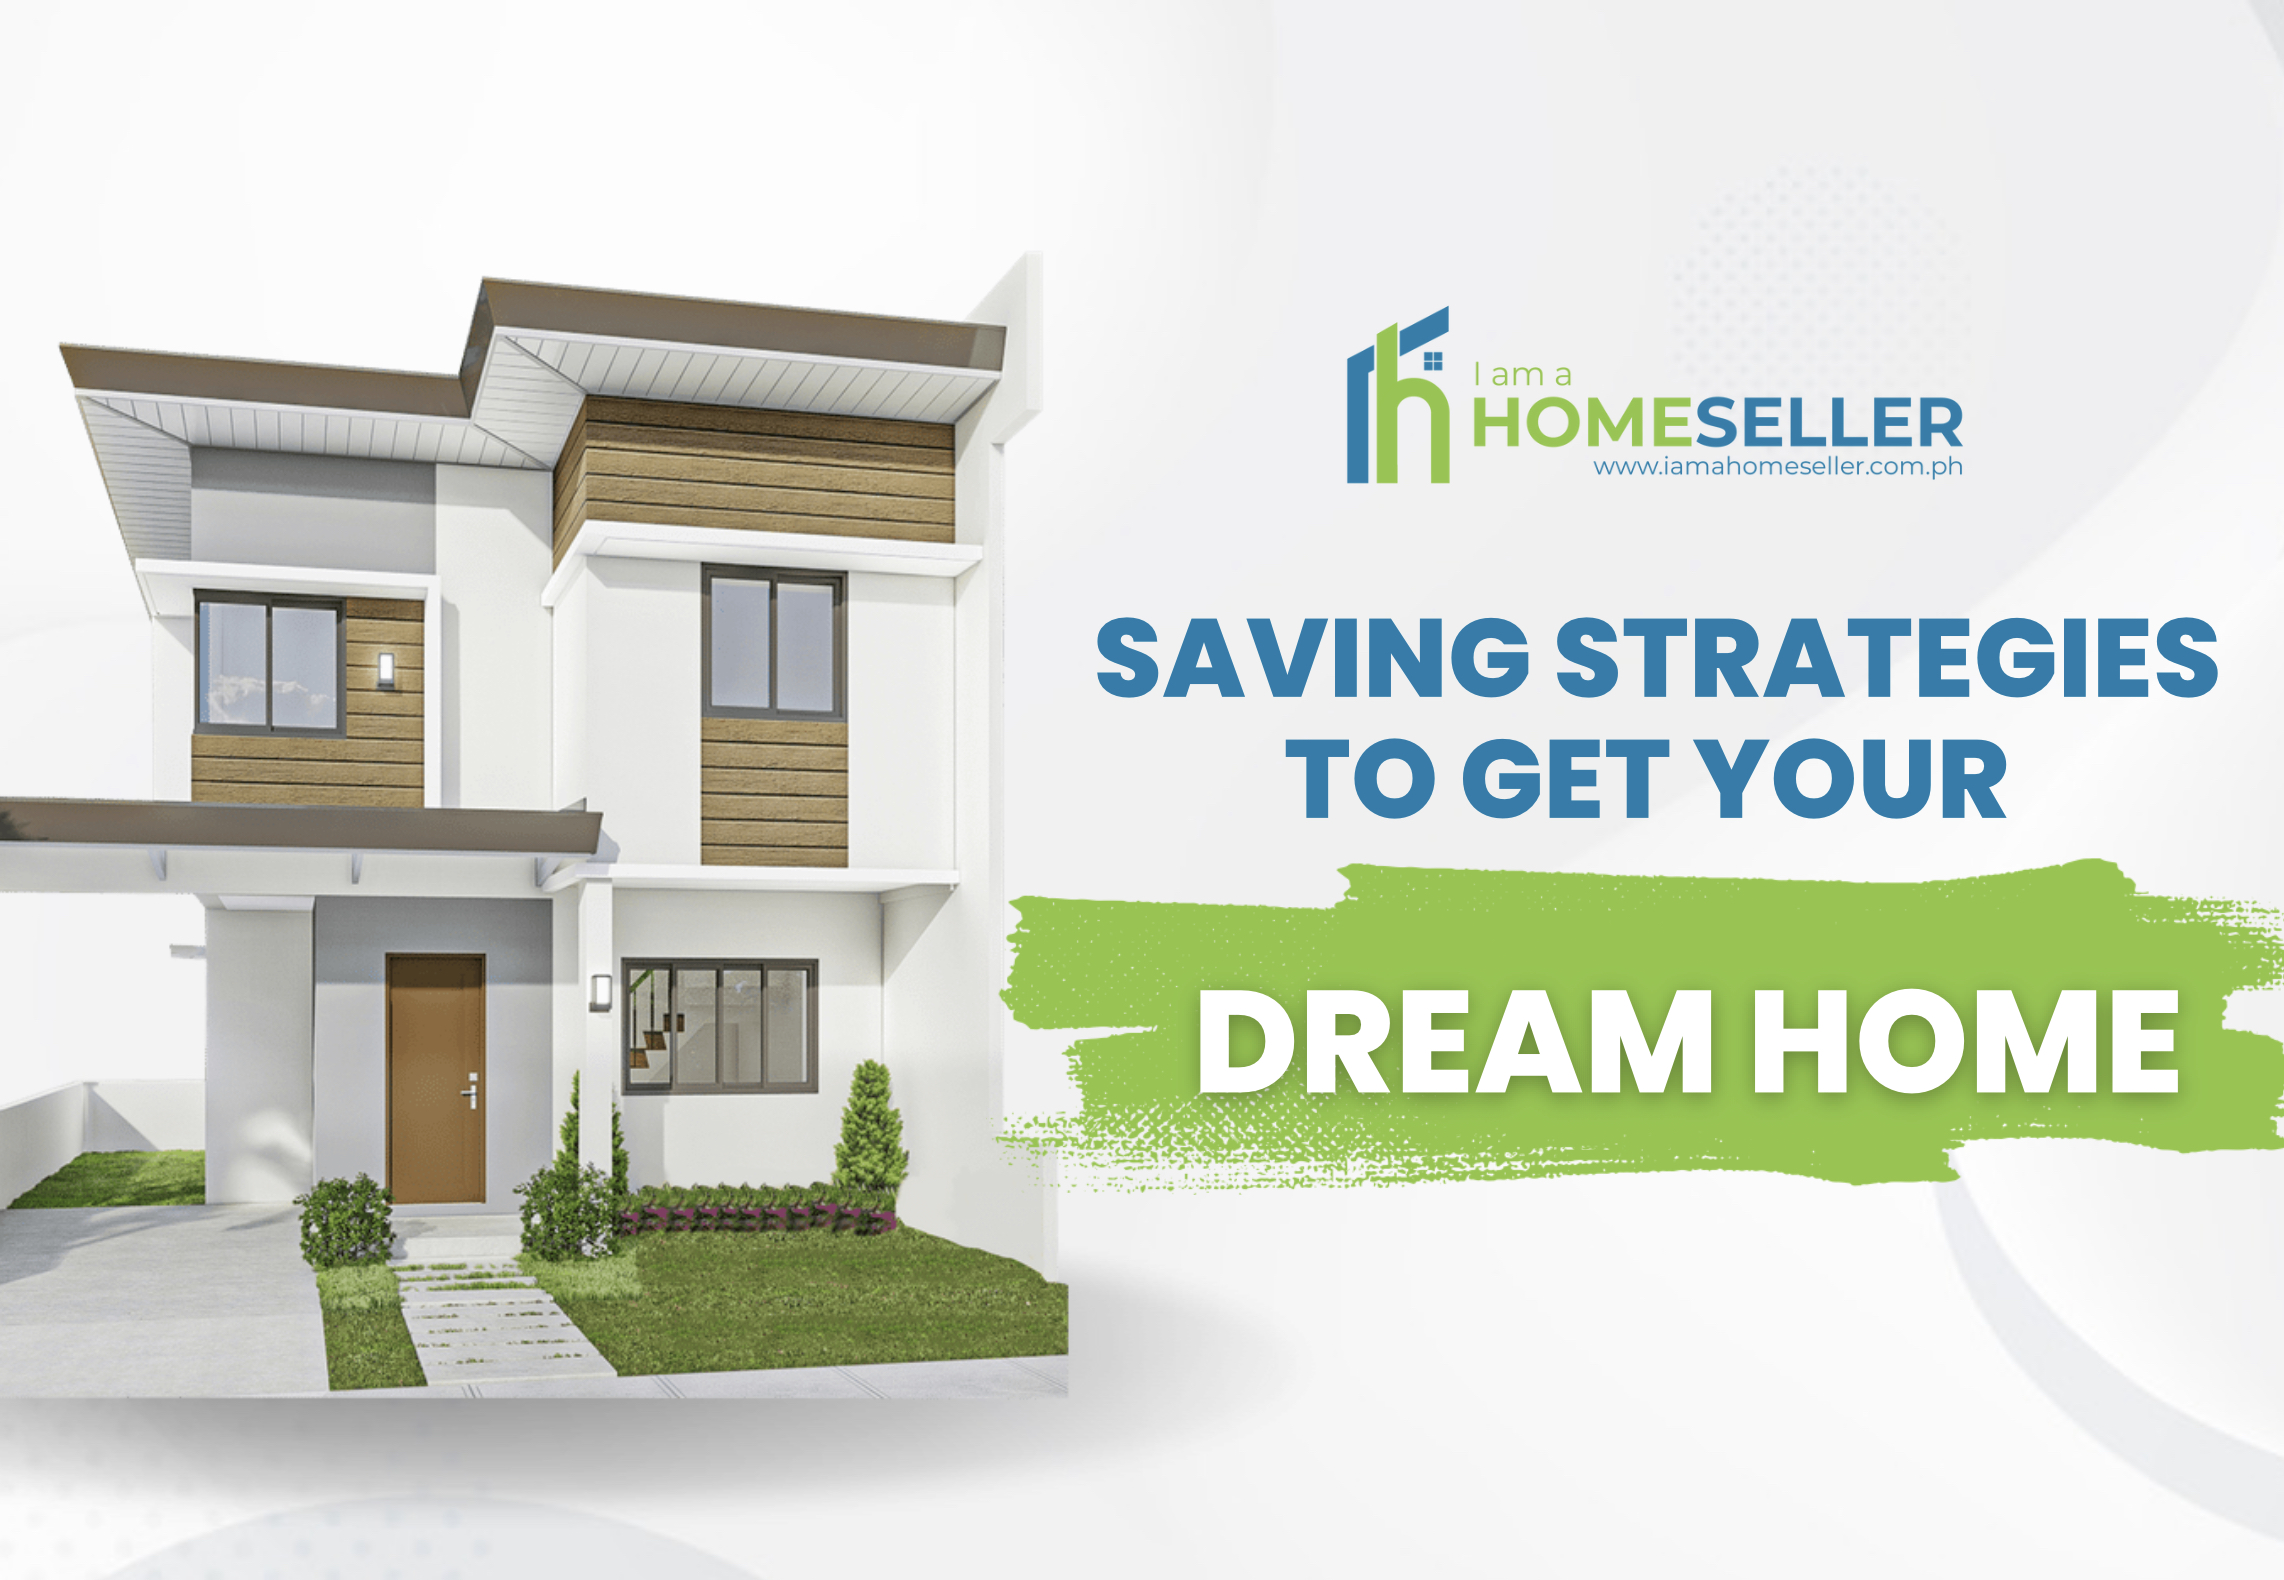 Saving strategies to get your dream home